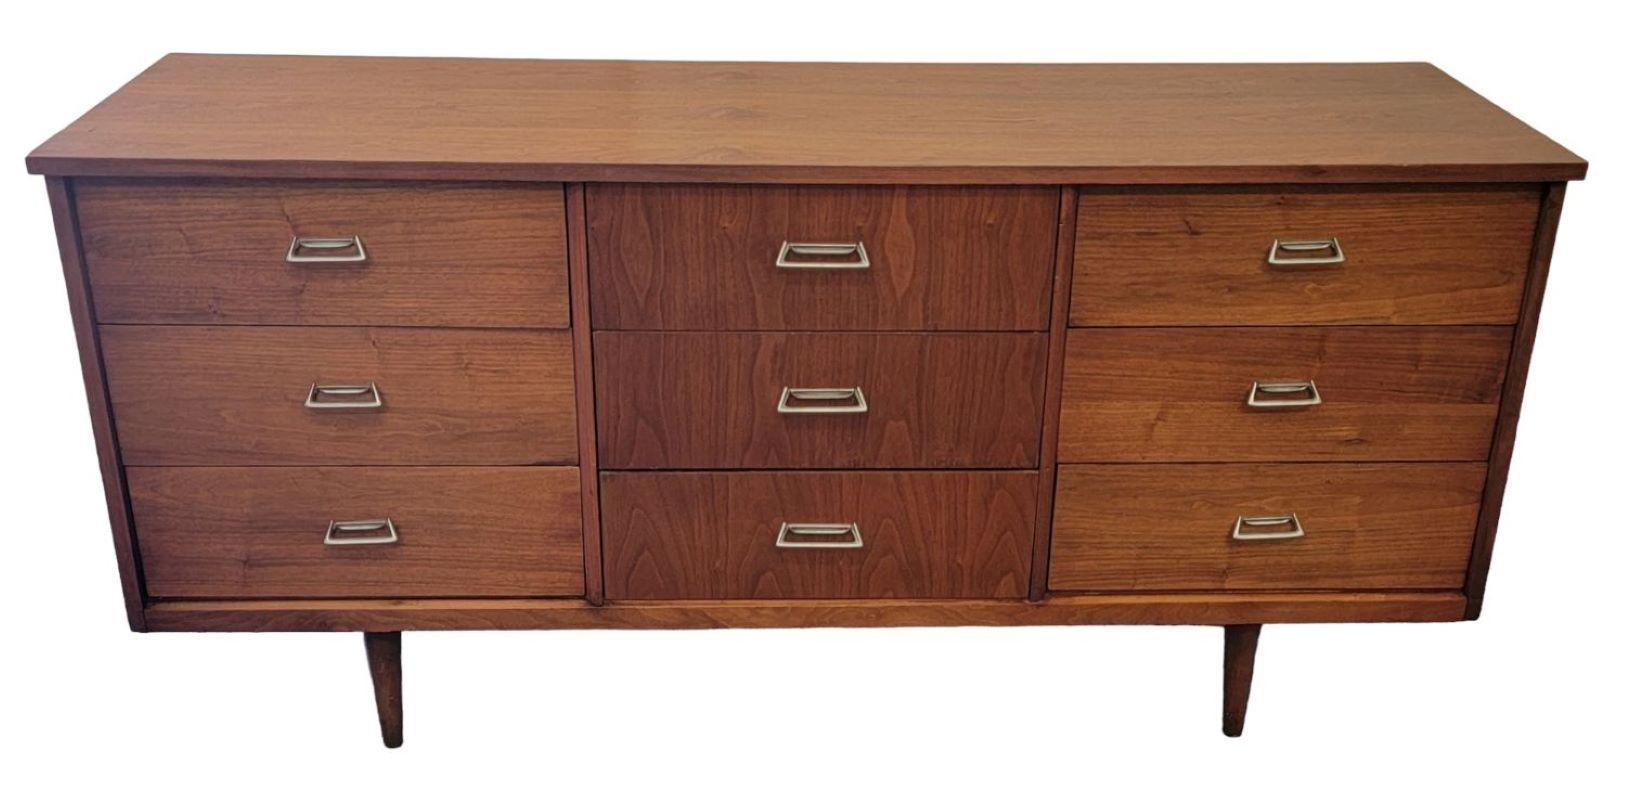 Midcentury wooden 9 drawer Credenza.
The handles are made from a brass mold and are secure and strong.
The legs/feet on this credenza are very strong. 

This credenza is in amazing condition the wood shows off the grain in a wonderful glowing